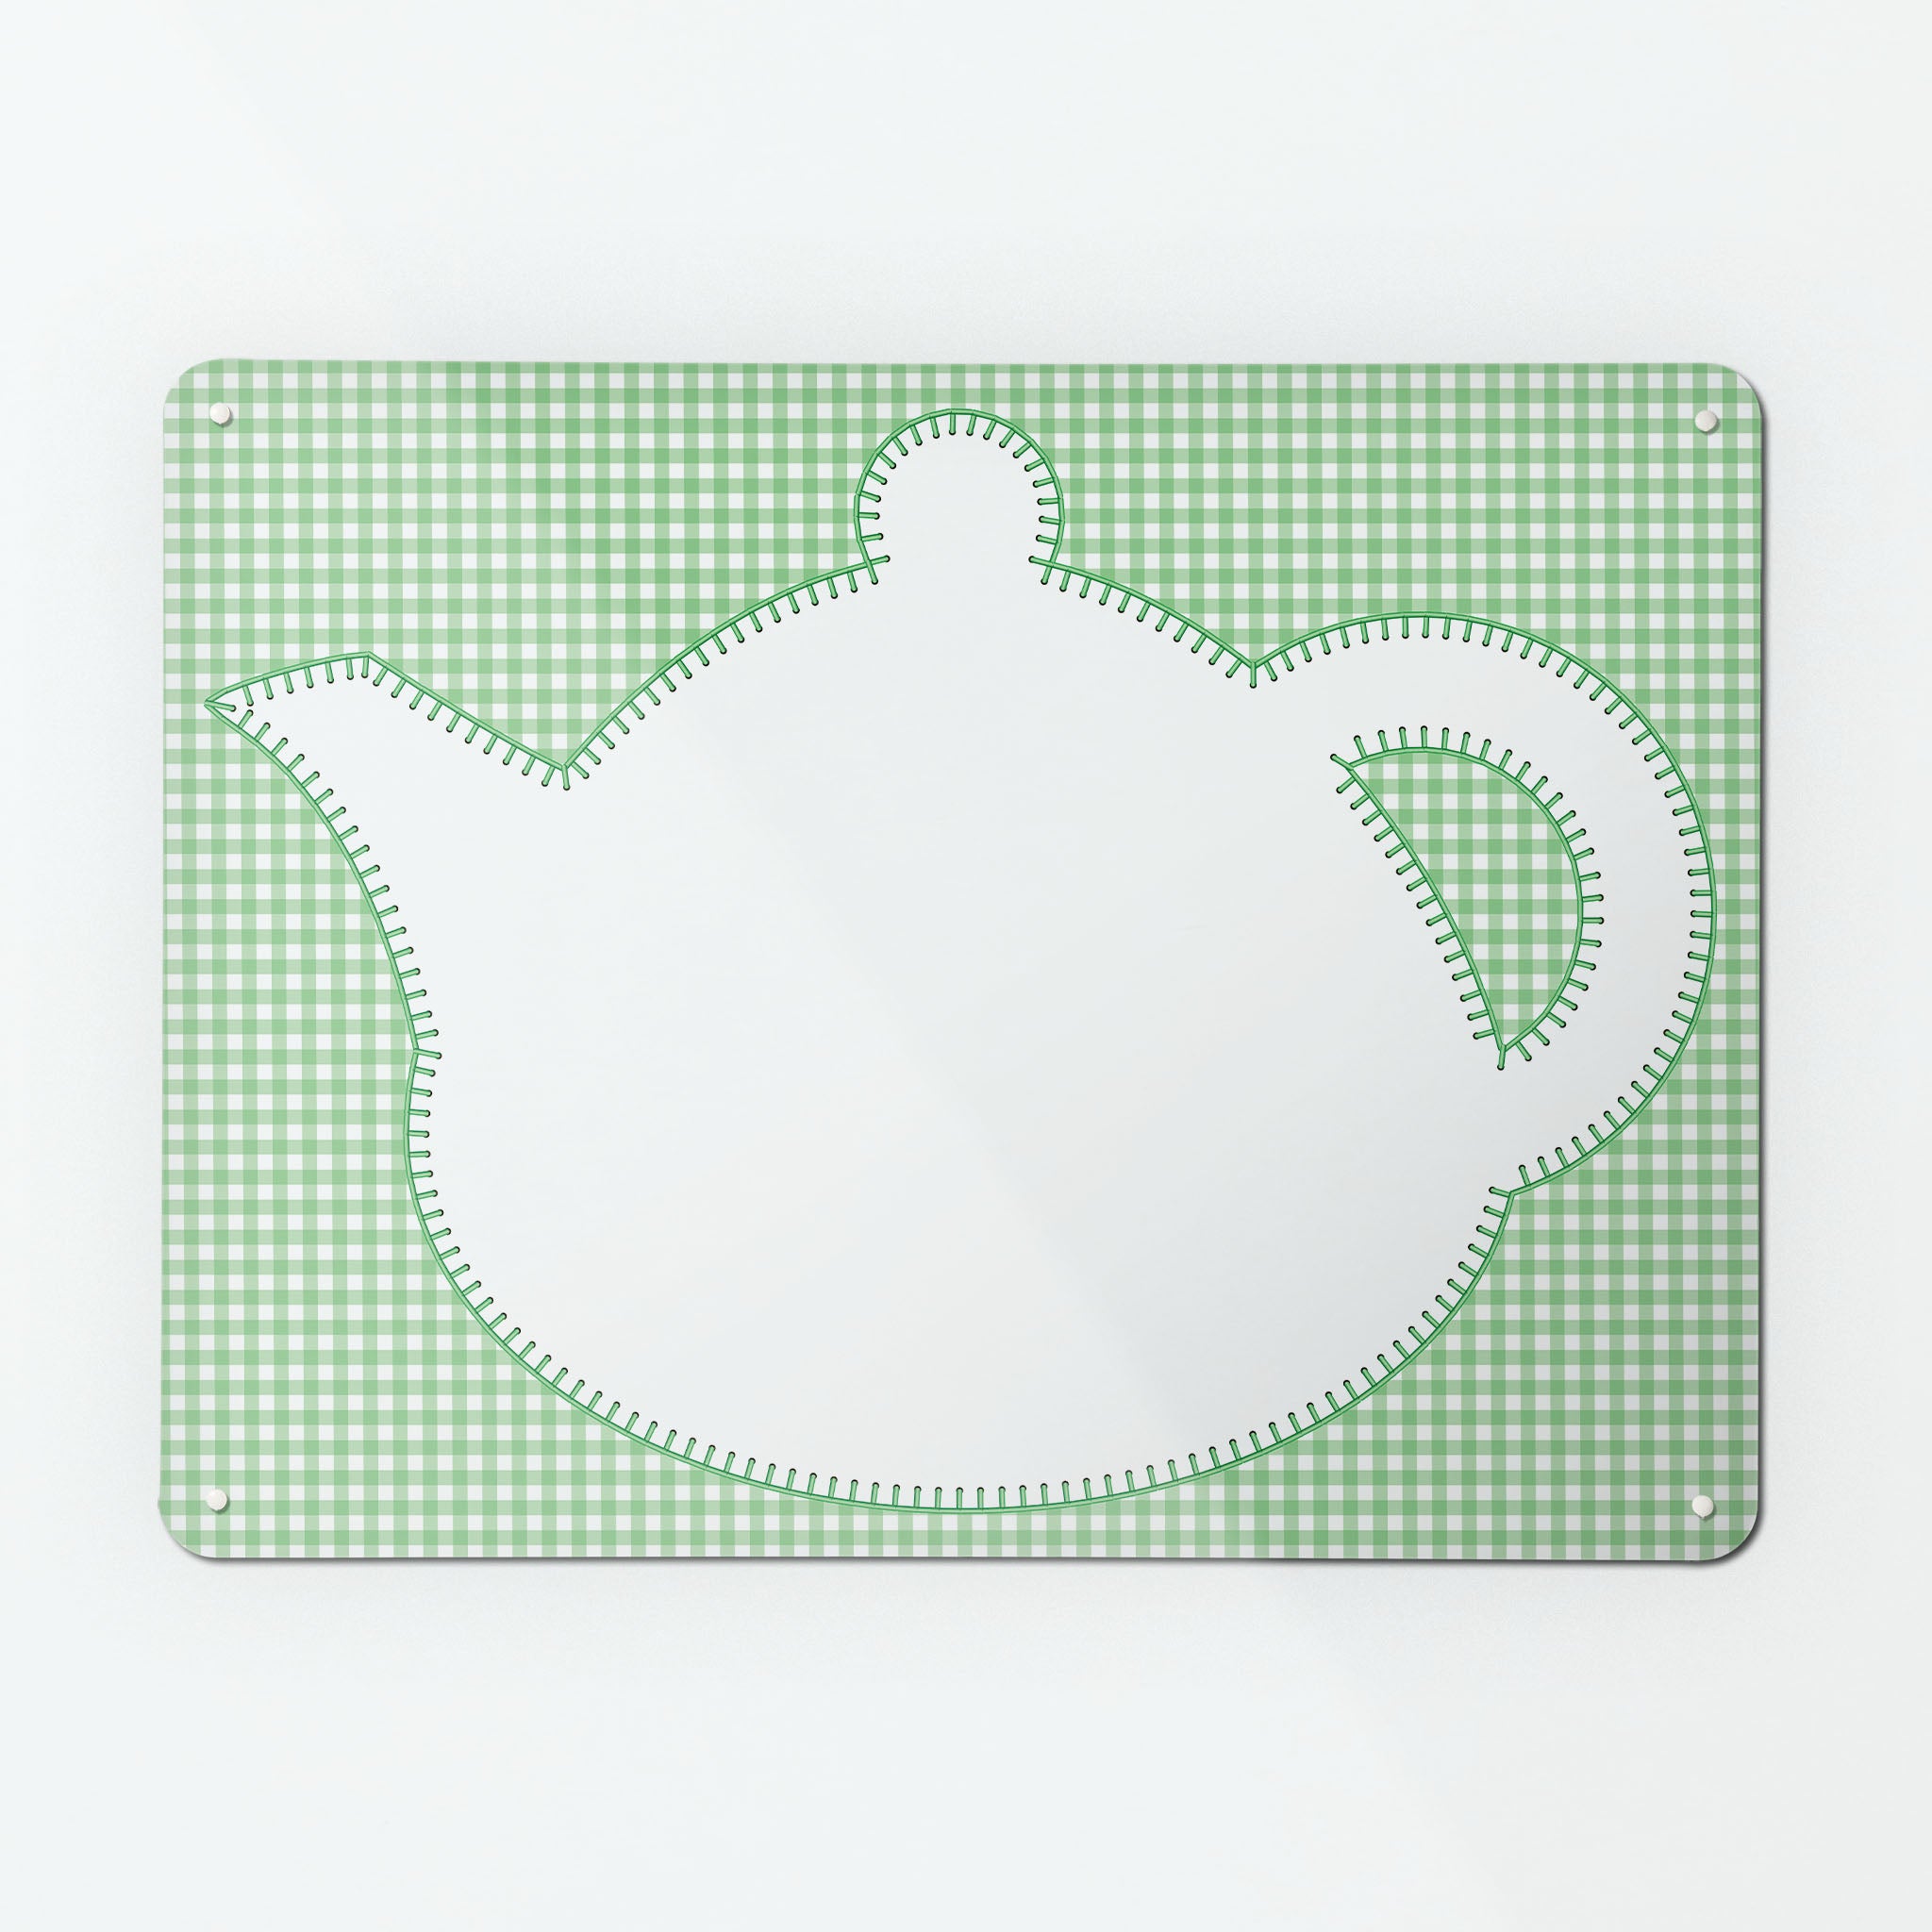 A large magnetic notice board  with an appliqué teapot design in white on a green gingham background